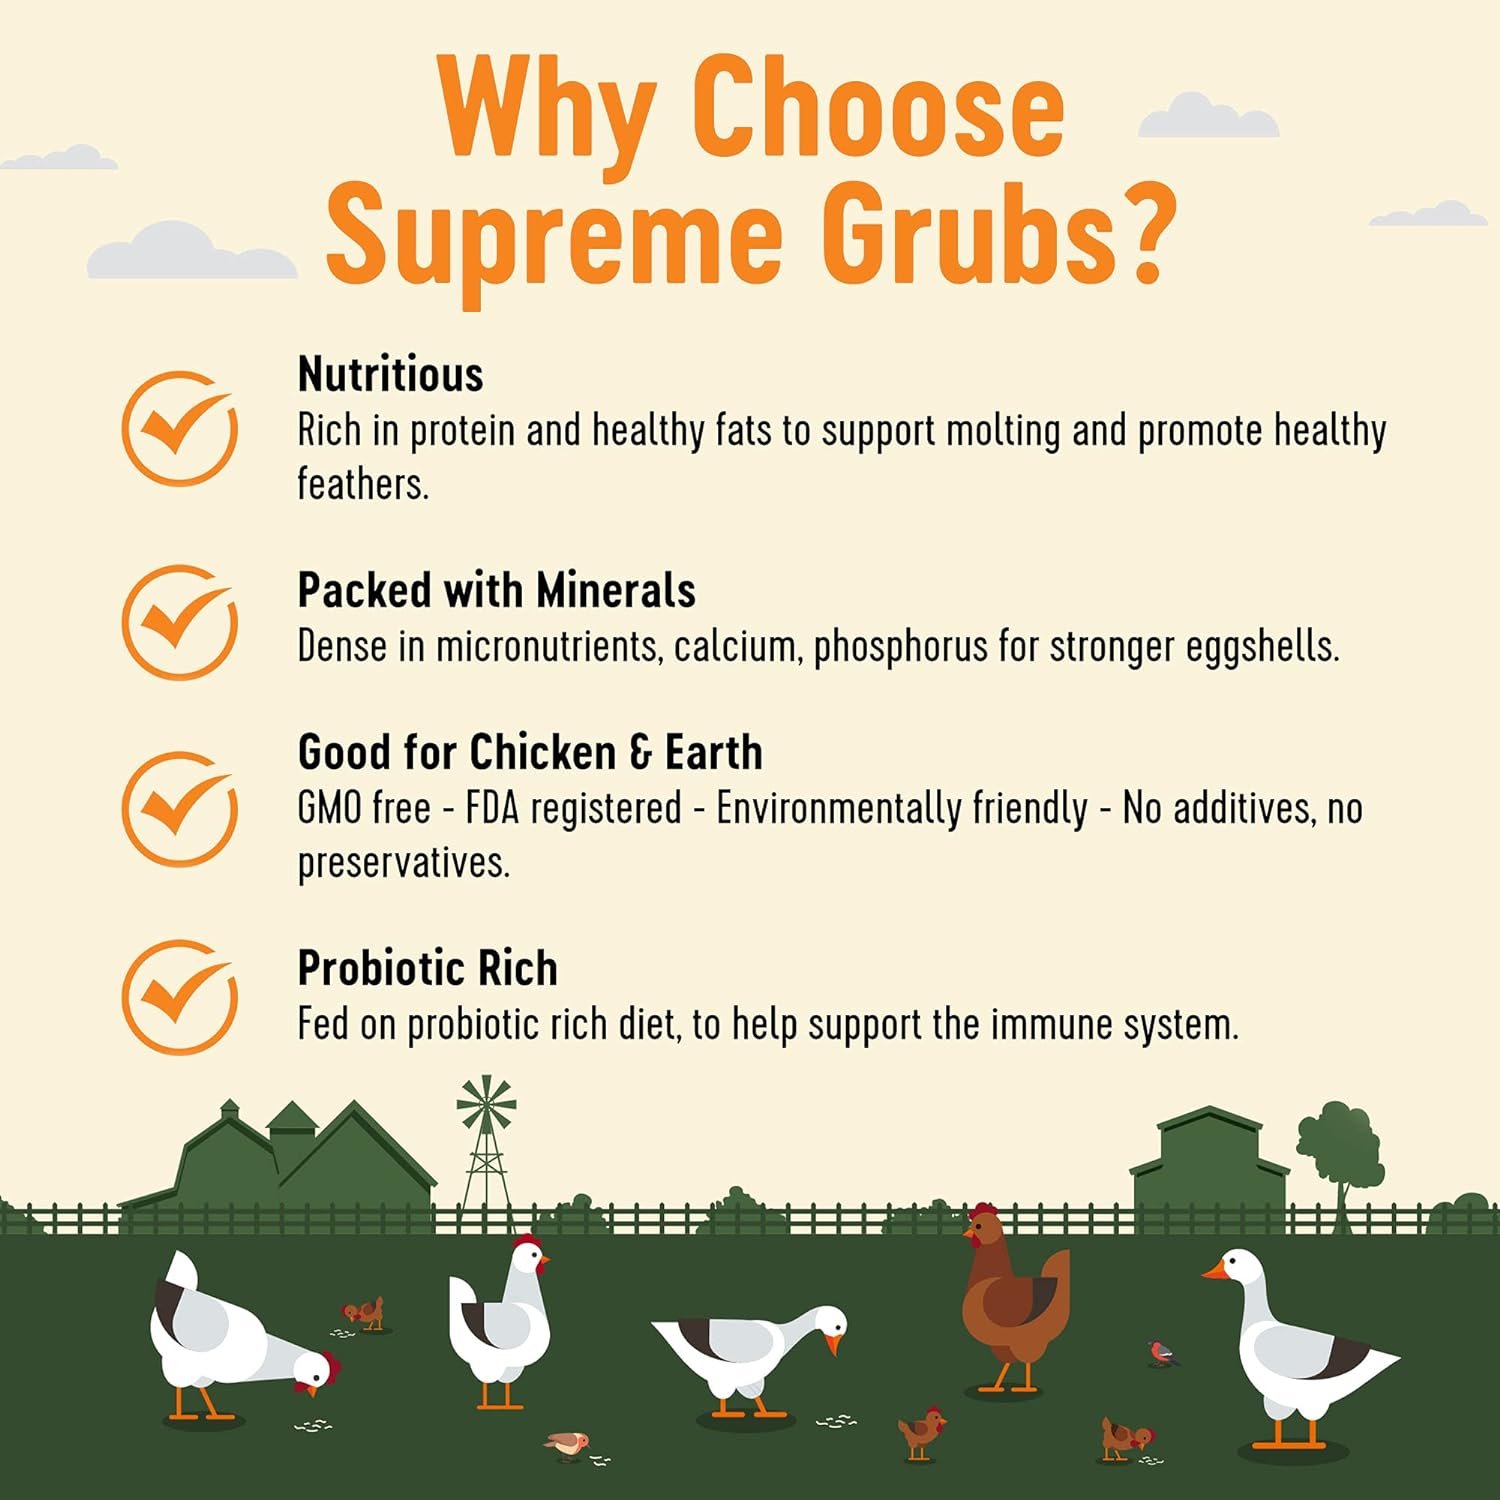 Supreme Grubs Natural Black Soldier Fly Larvae for Chickens, 85X More Calcium Than Mealworms-High Protein Grub Food Chicken Treats for Hens, Probiotic-Rich Chicken Feed, Calcium-Dense Bird Treat 5lb